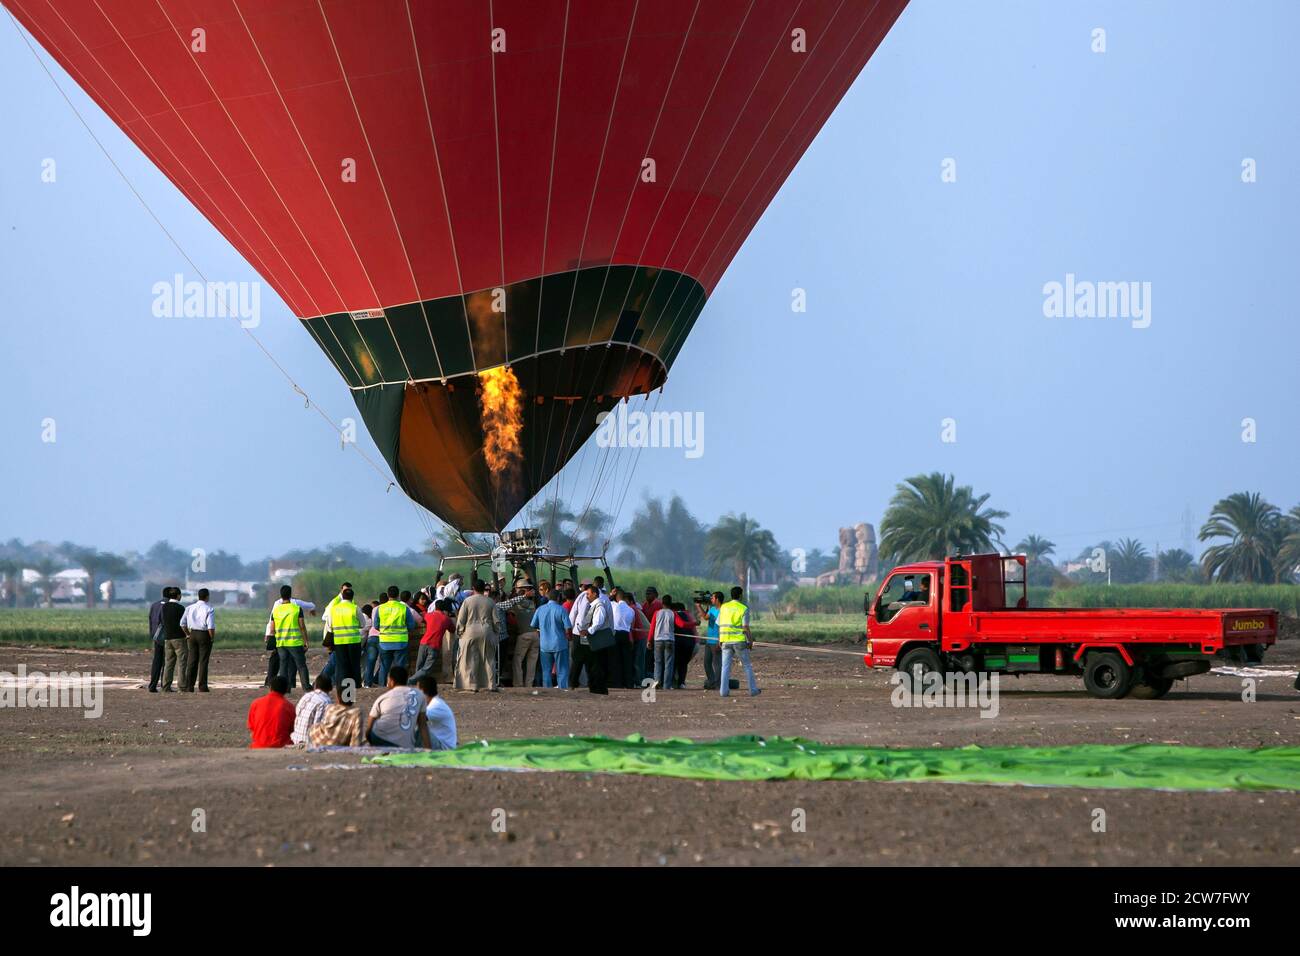 A flame burns as a hot air balloon prepares for lift-off at sunrise at Luxor in Egypt. The balloon will then fly over the Nile River and ancient sites Stock Photo